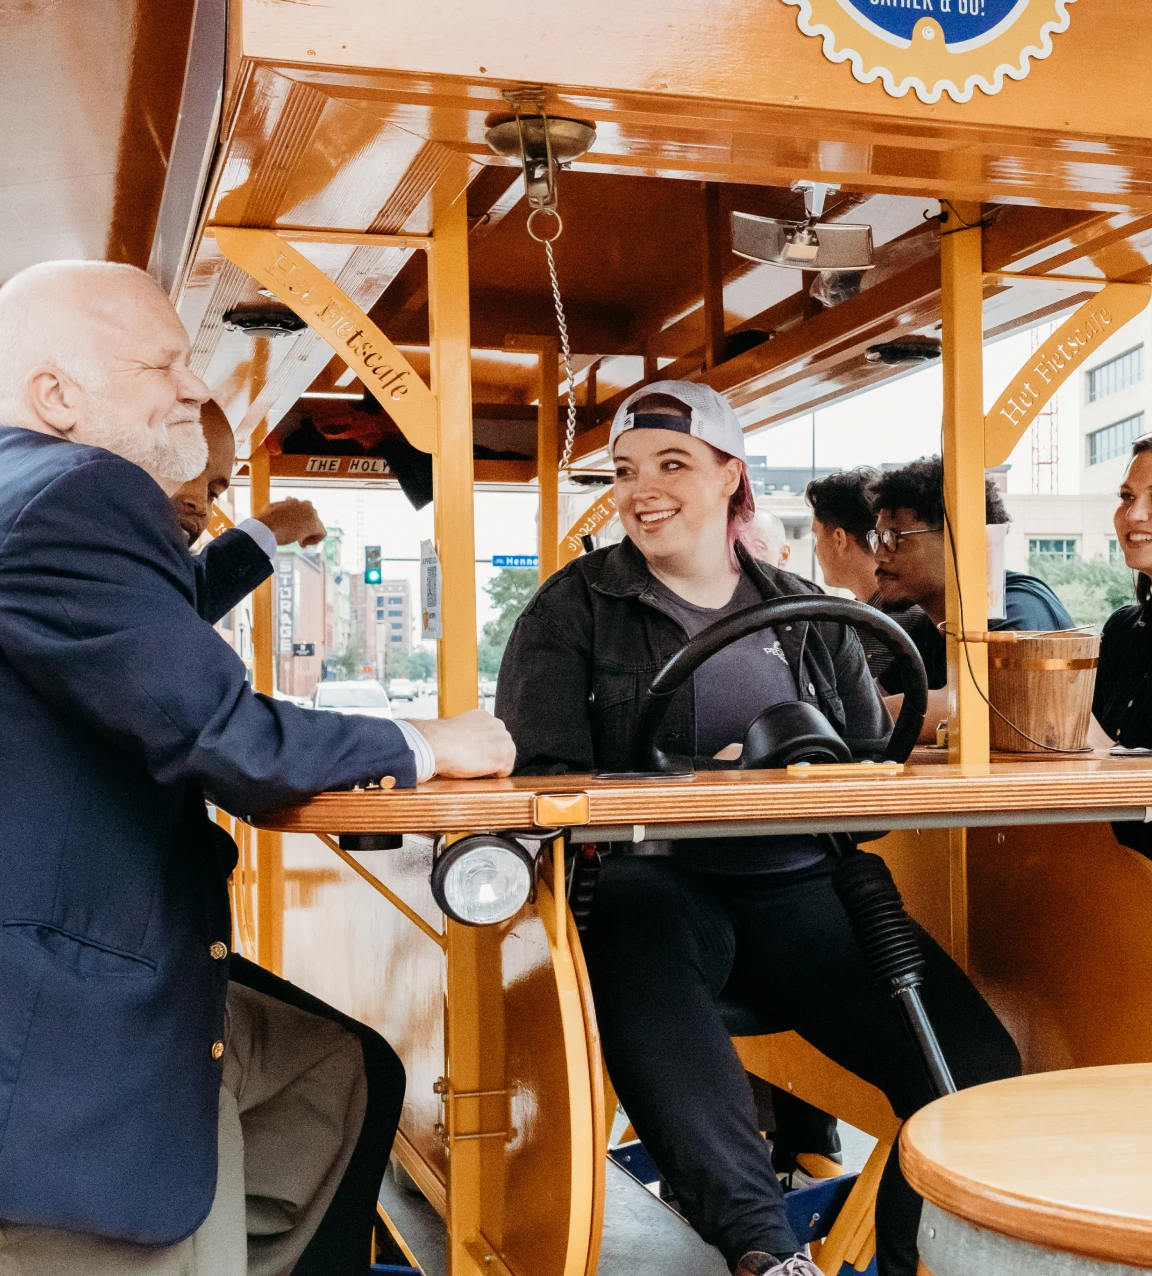 employees on Pedal Pub for company outing